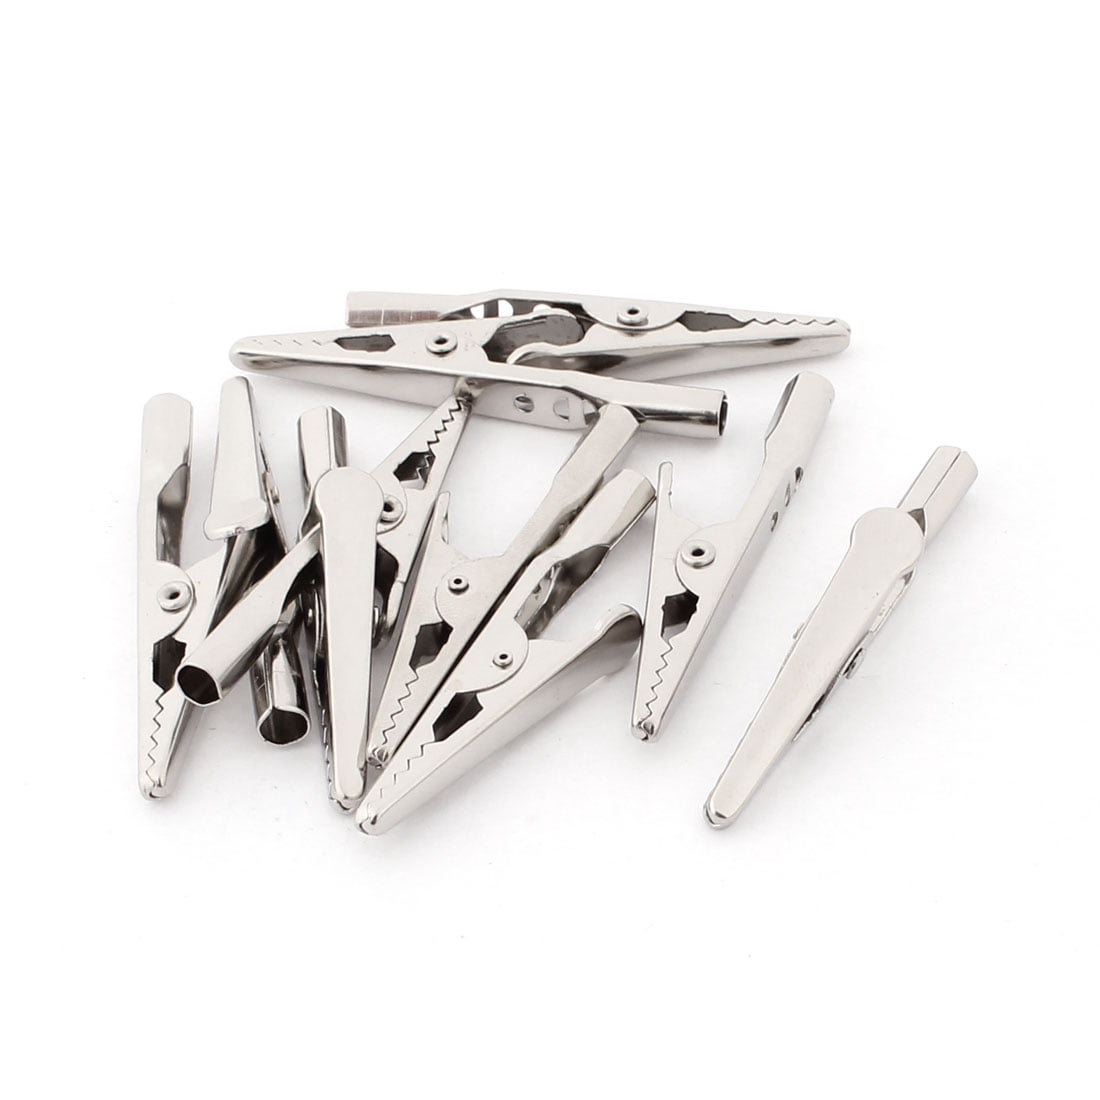 Uxcell a14062400ux0715 25 Pcs Silver Tone Metal Alligator Clip Crocodile Clamps Pack of 25